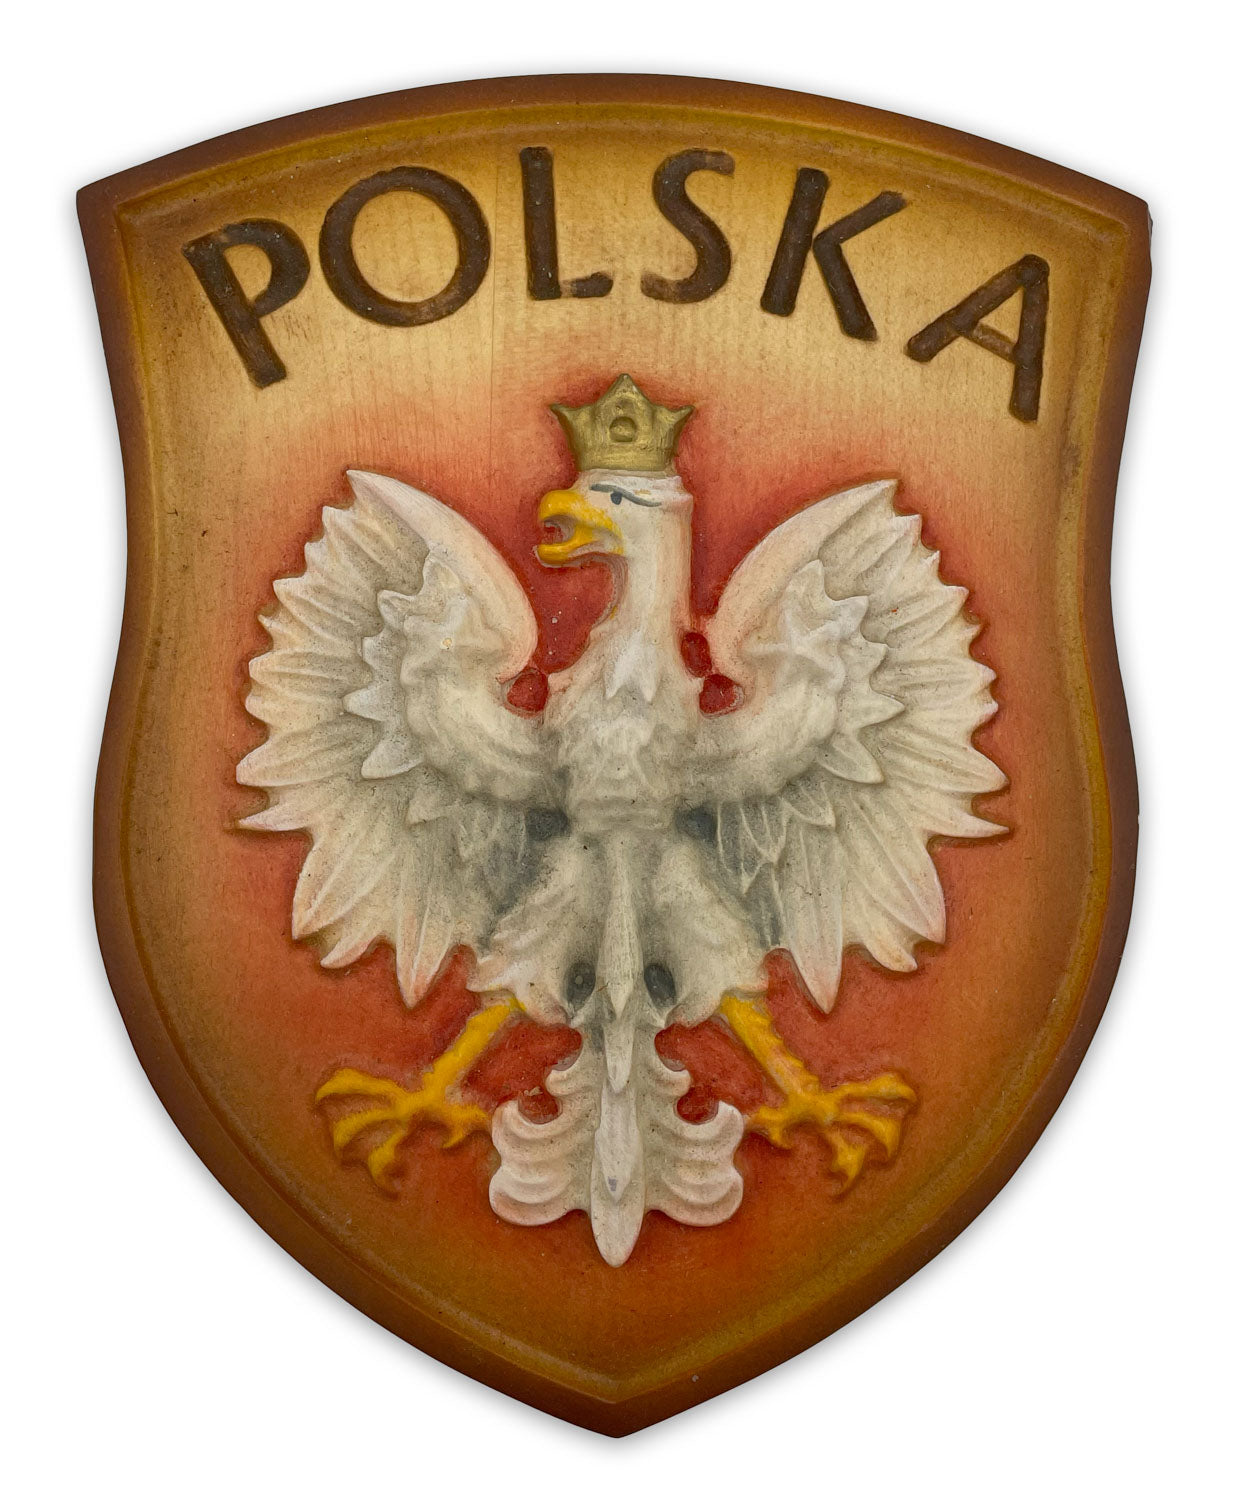 Wood Carved Coat of Arms of Poland, Medium